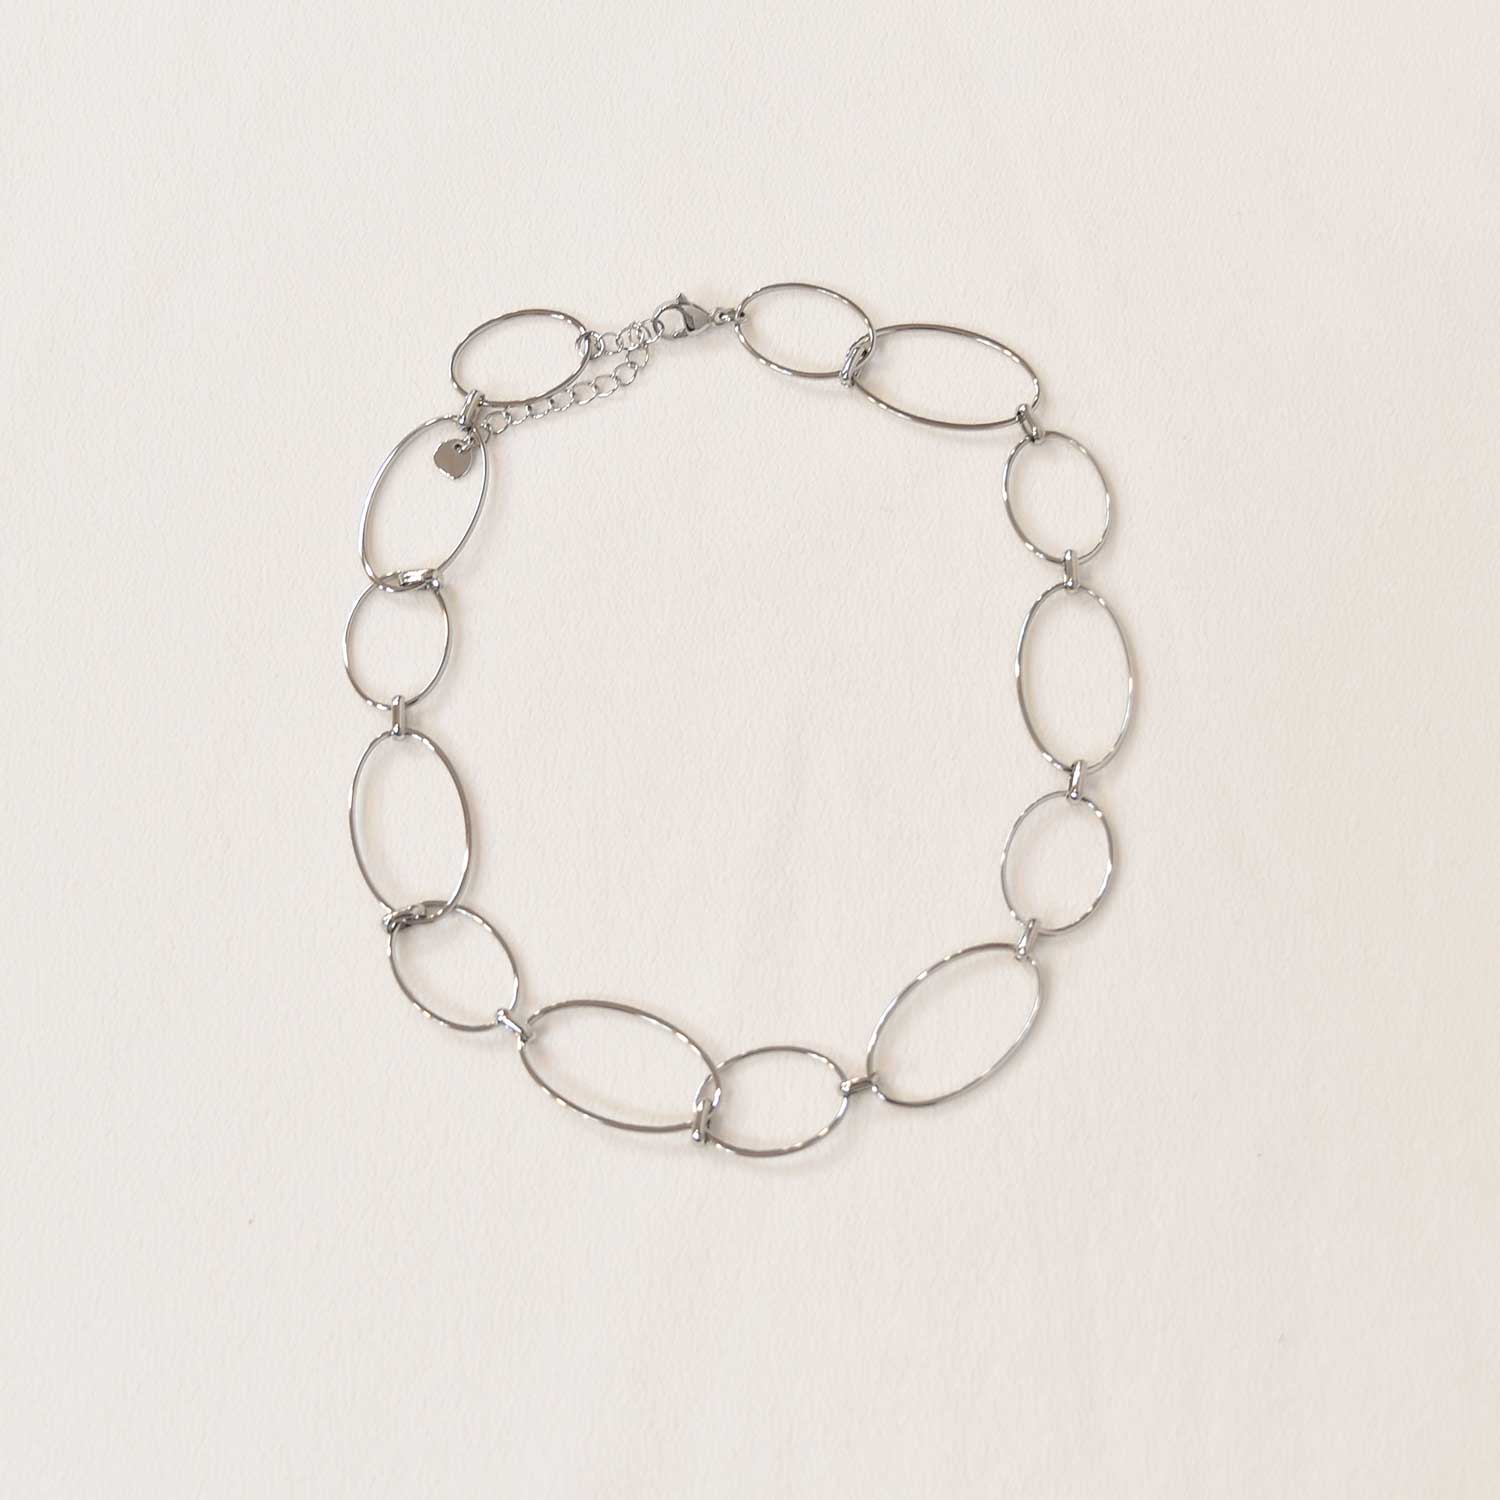 Silver oval necklace